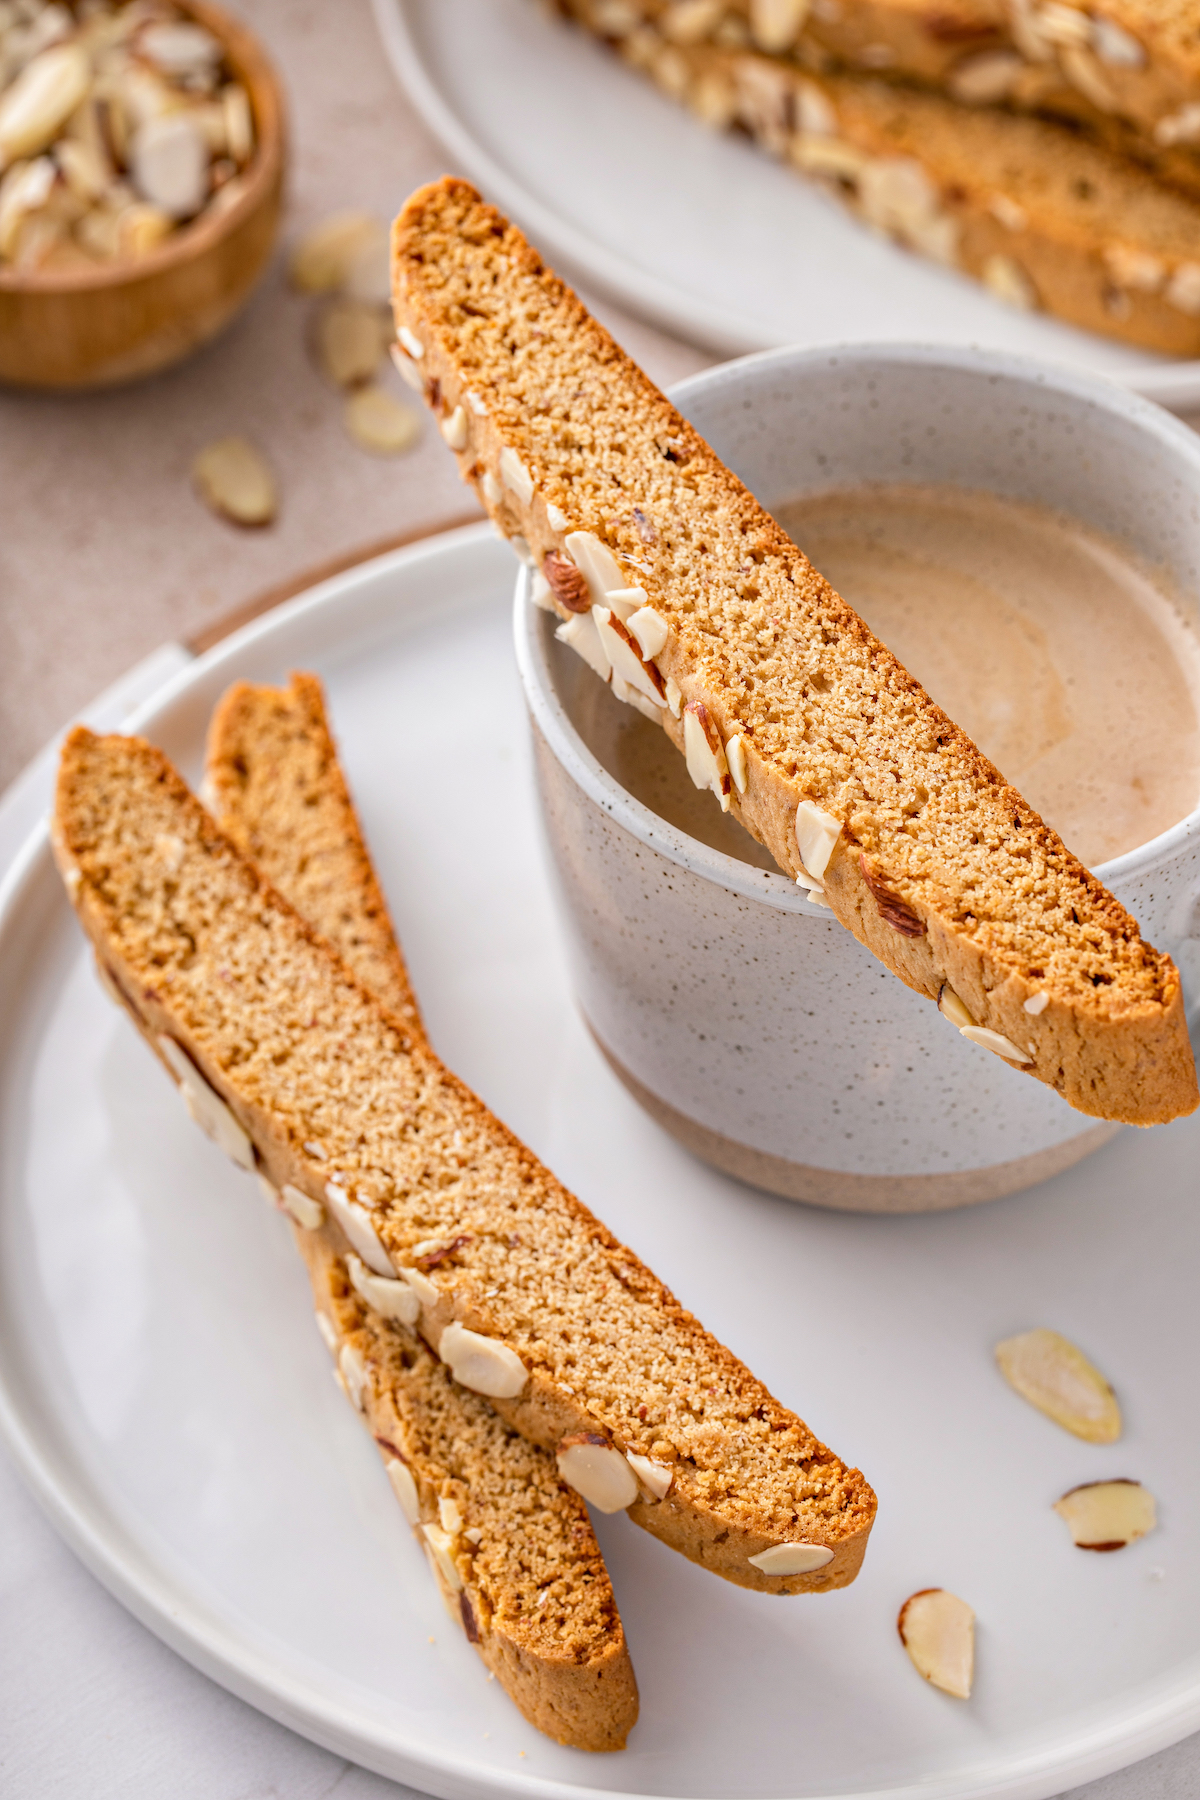 Almond biscotti with a cup of creamy coffee.